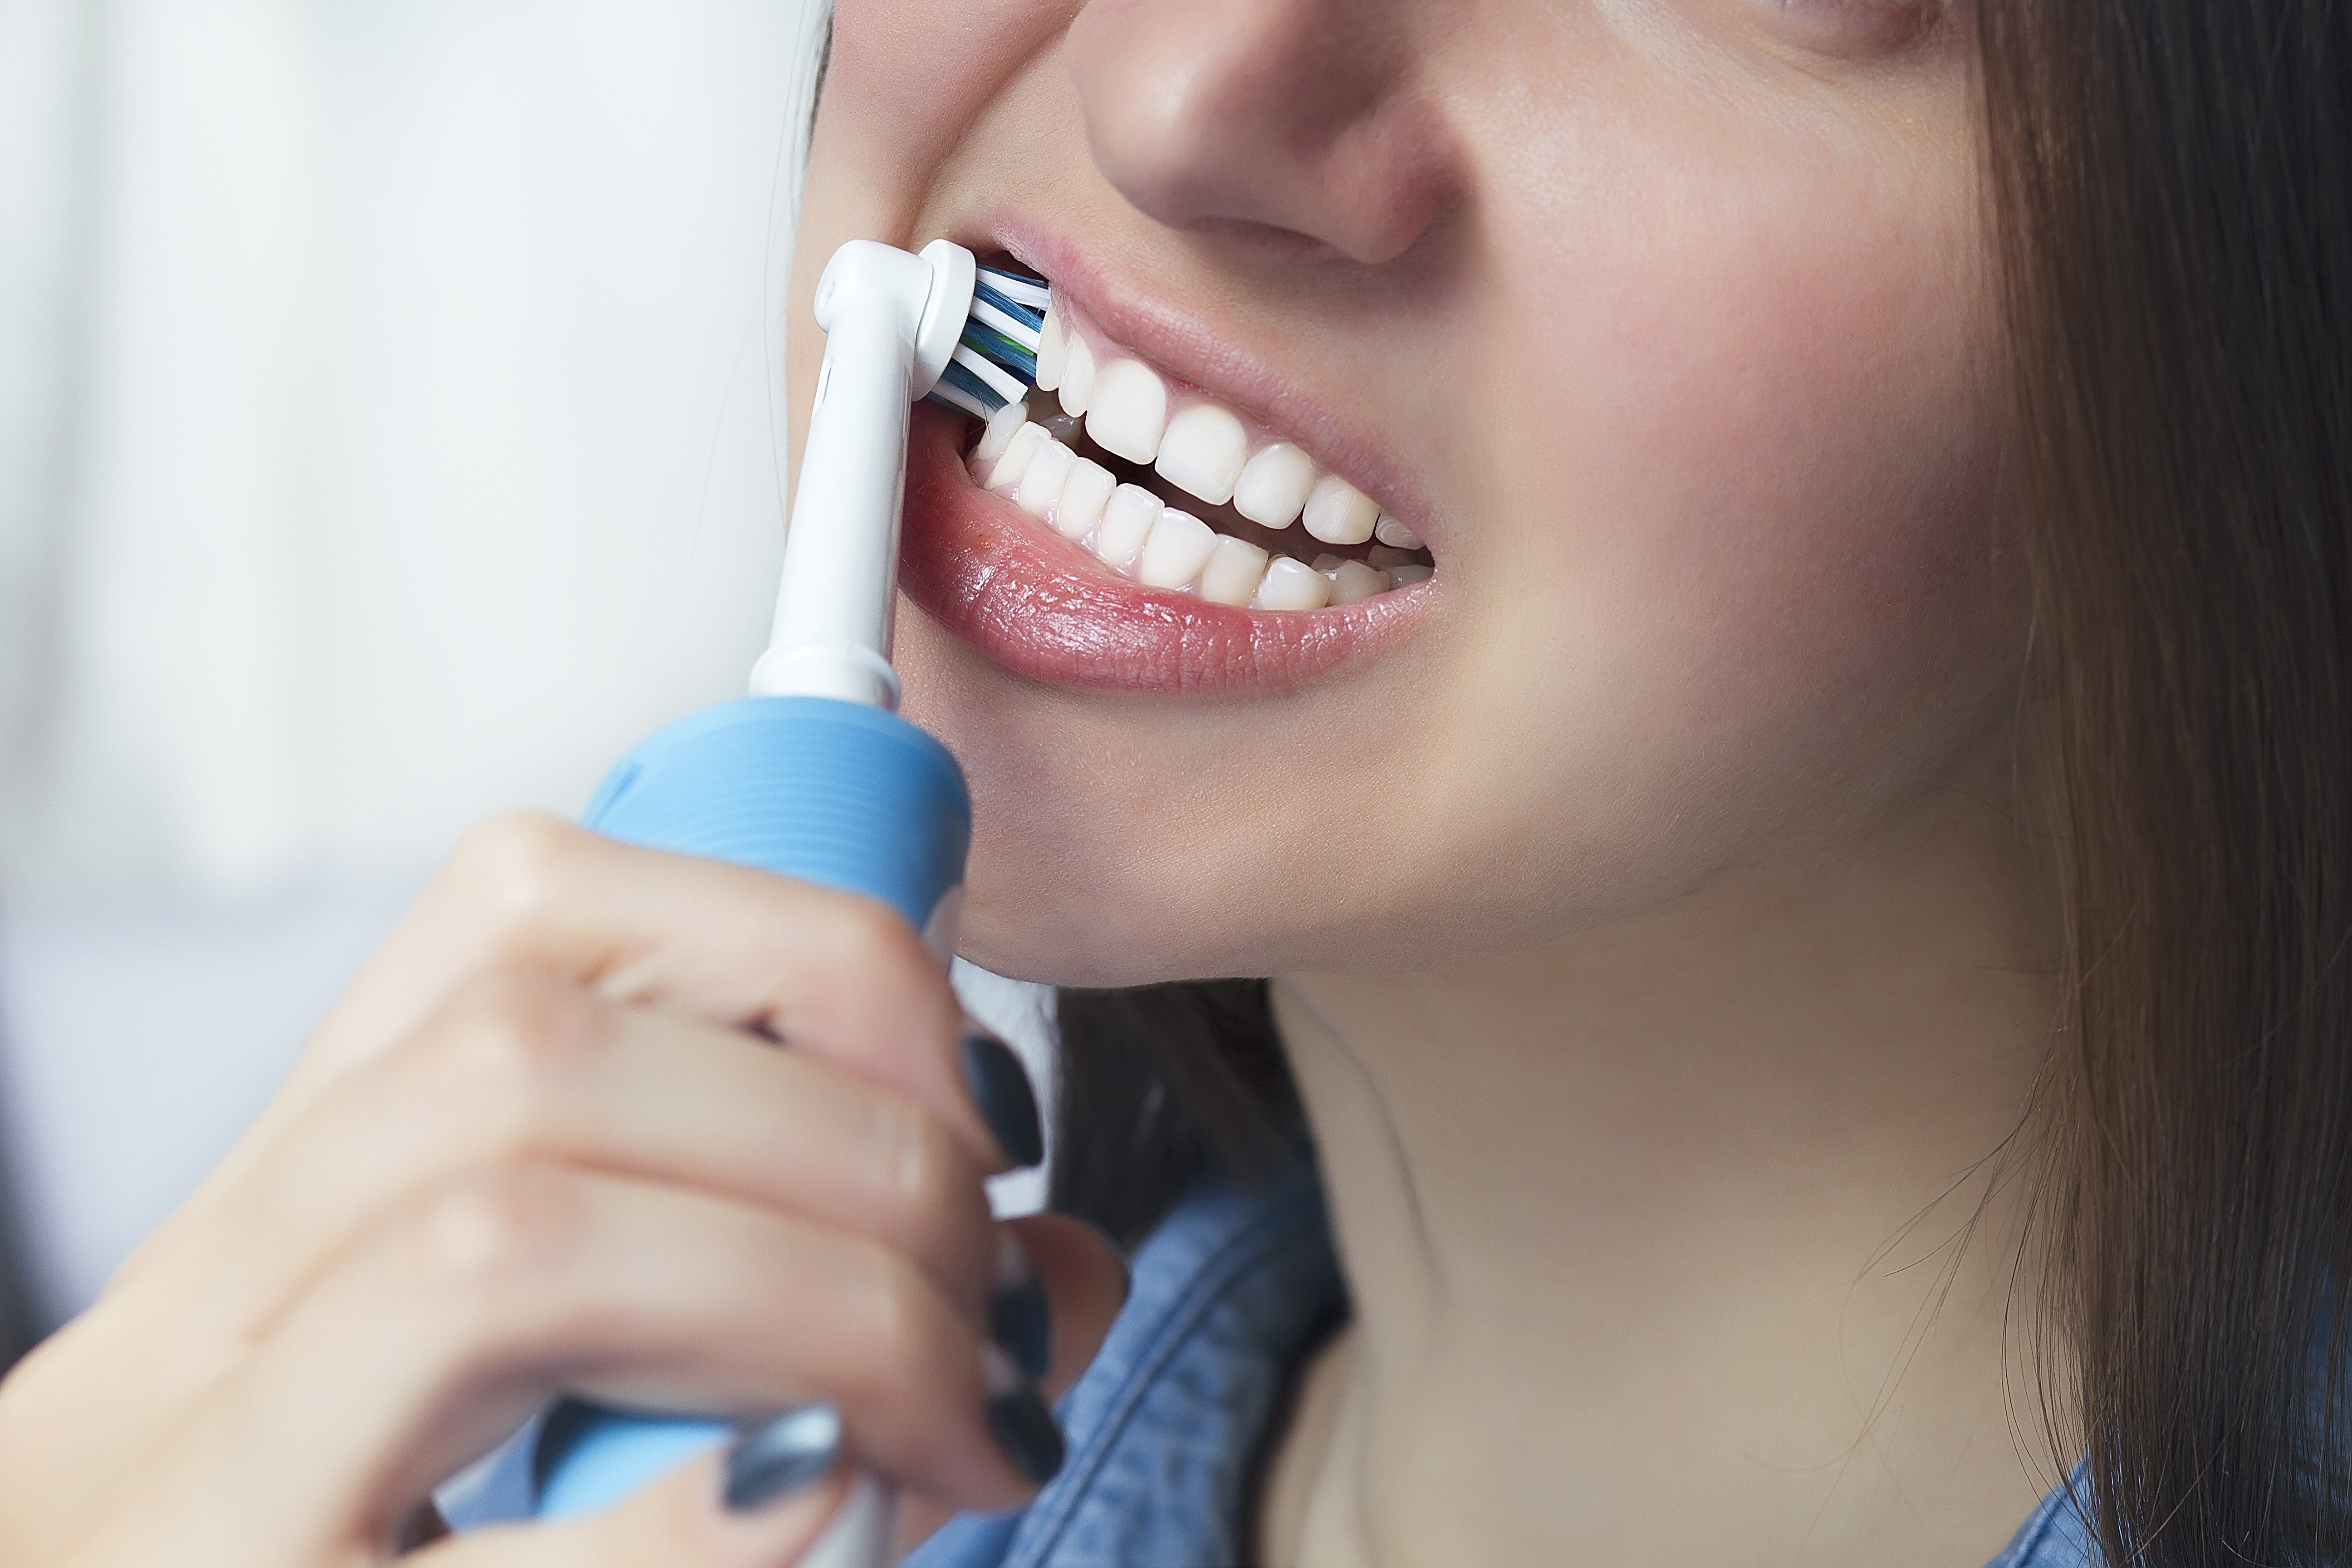 More Chinese people are using electric toothbrushes as they become more affluent. Photo: Shutterstock